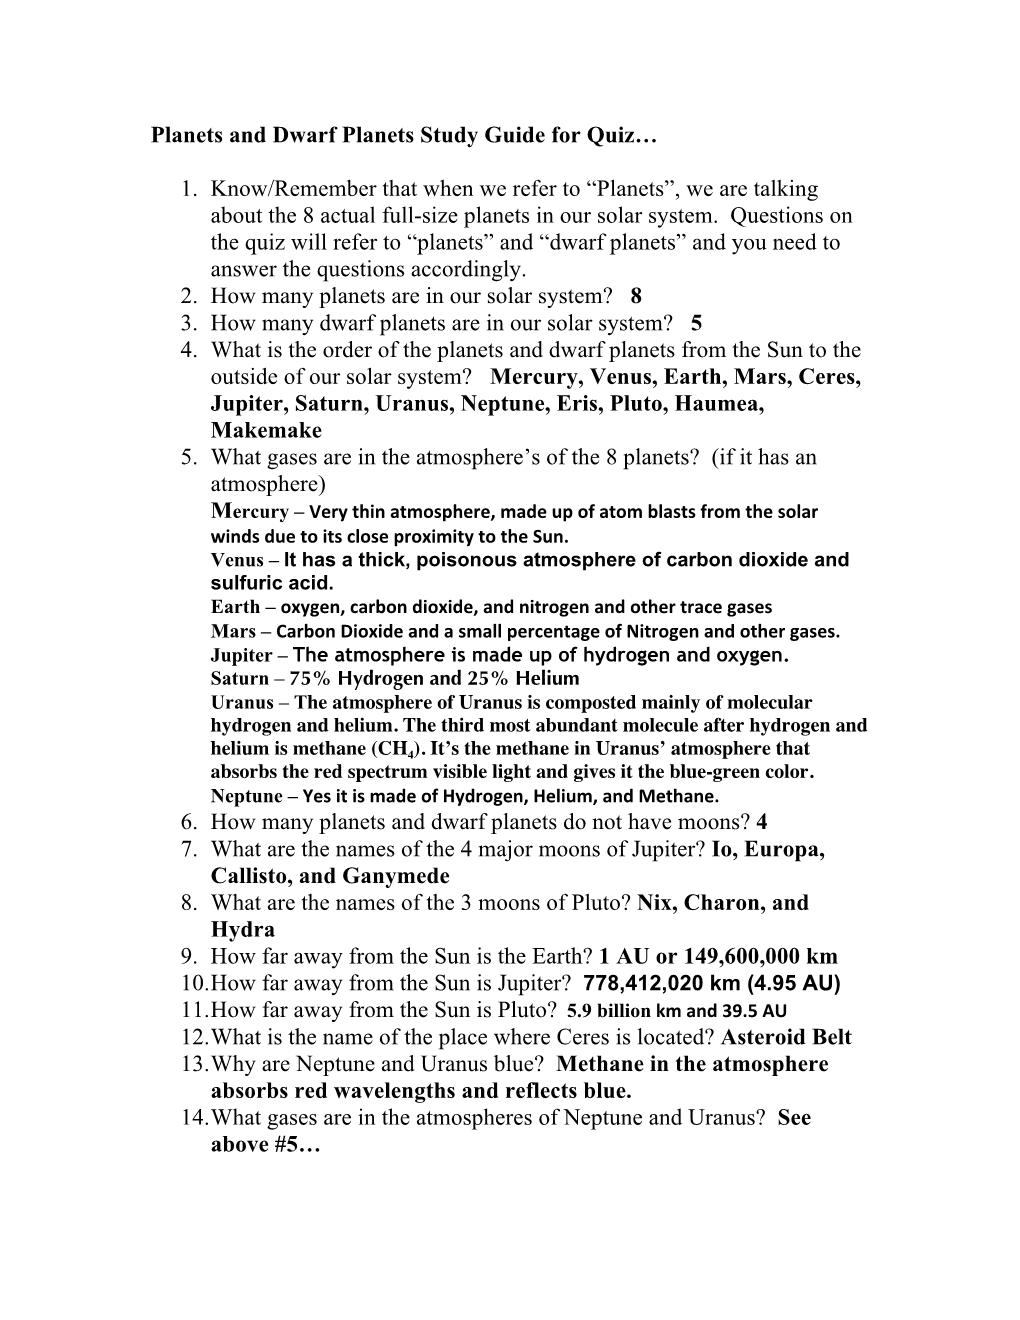 Answer Key Planets and Dwarf Planets Study Guide for Quiz…